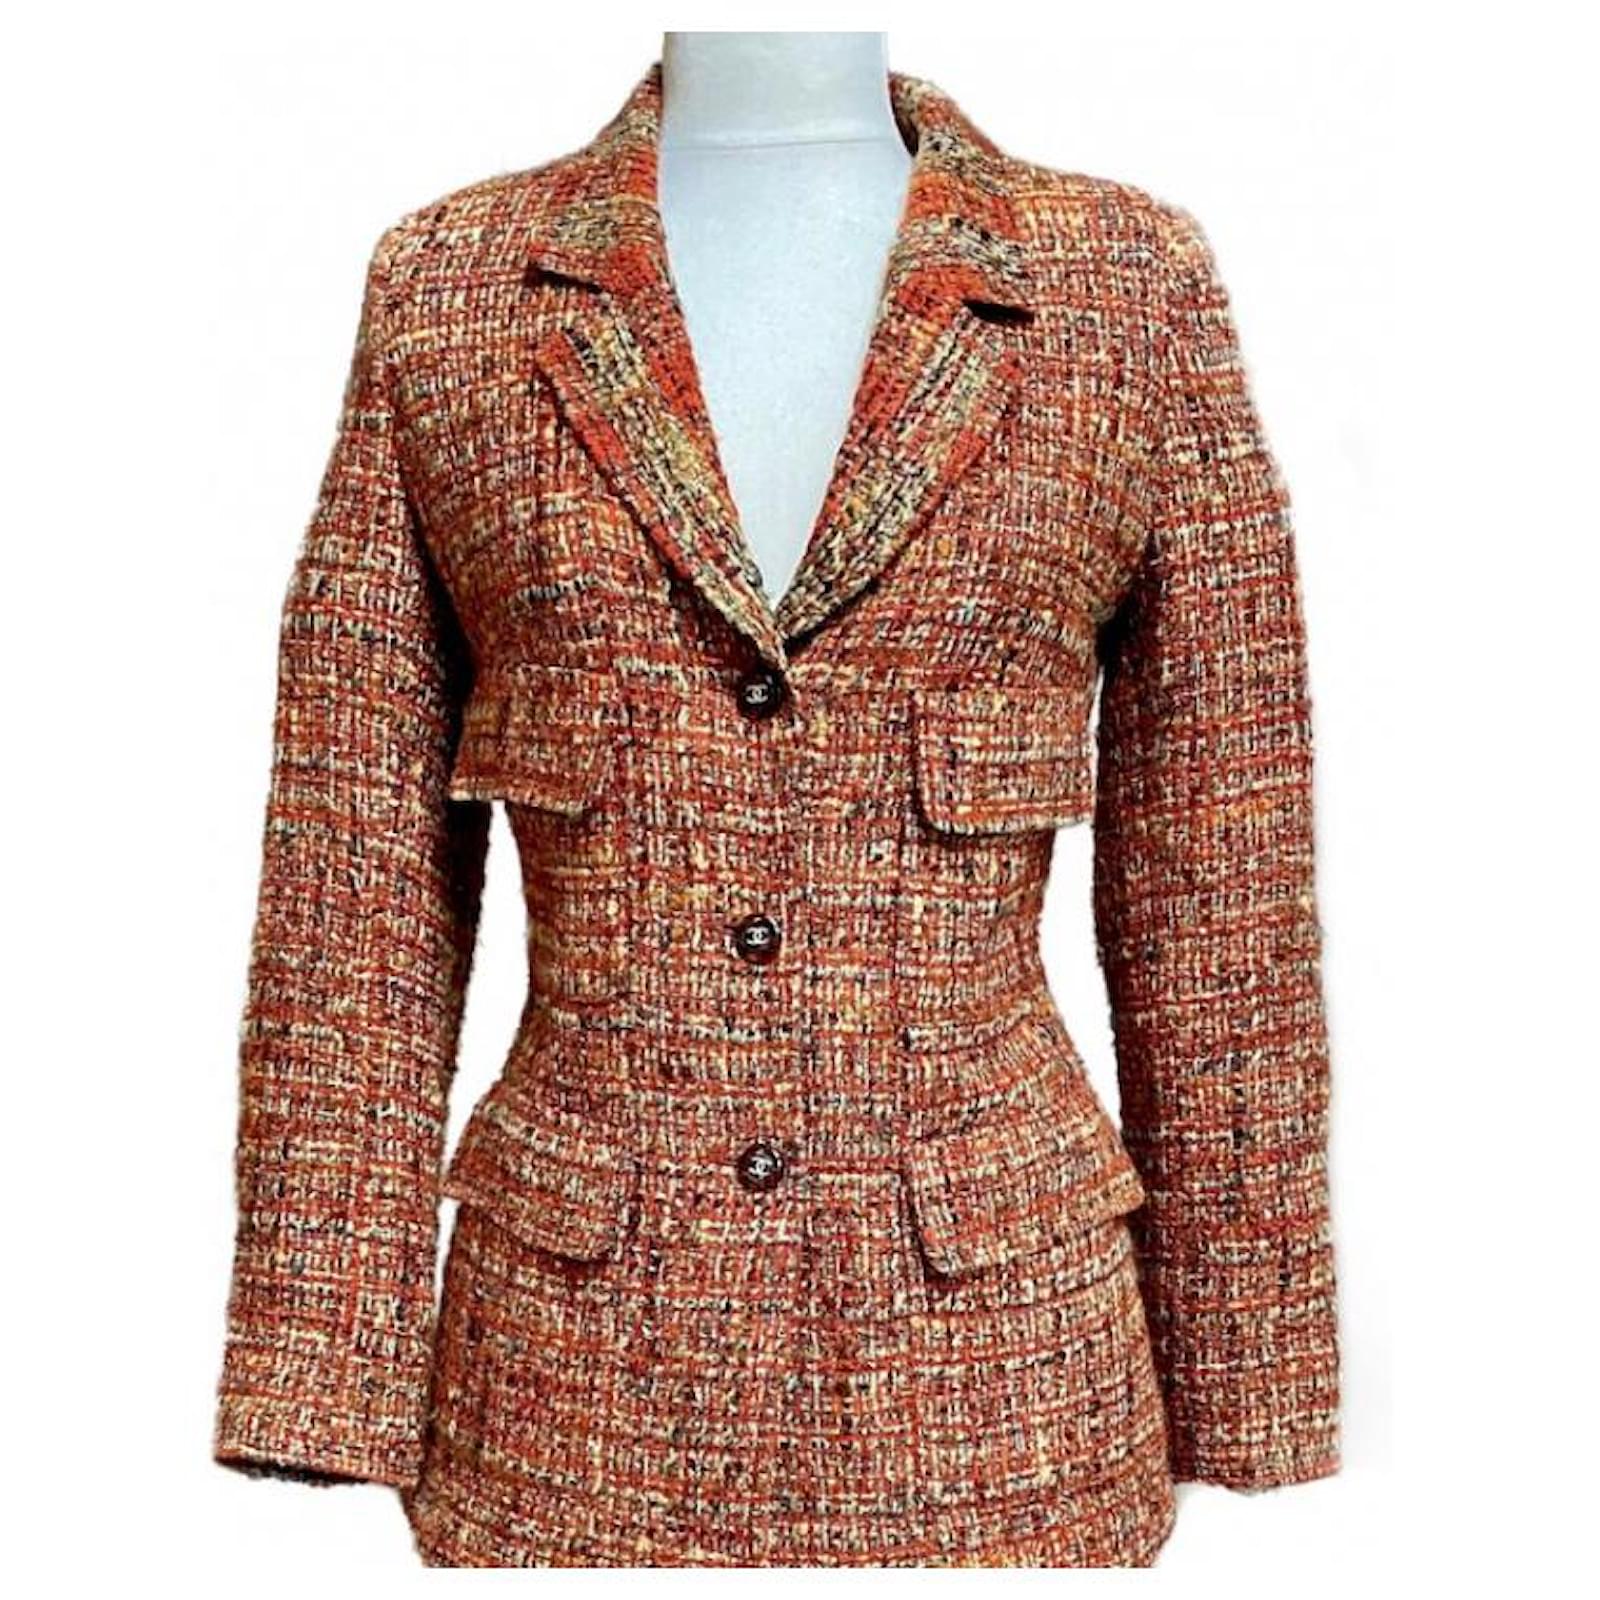 CHANEL FANTASY TWEED SUIT FROM 1998 SPRING COLLECTION